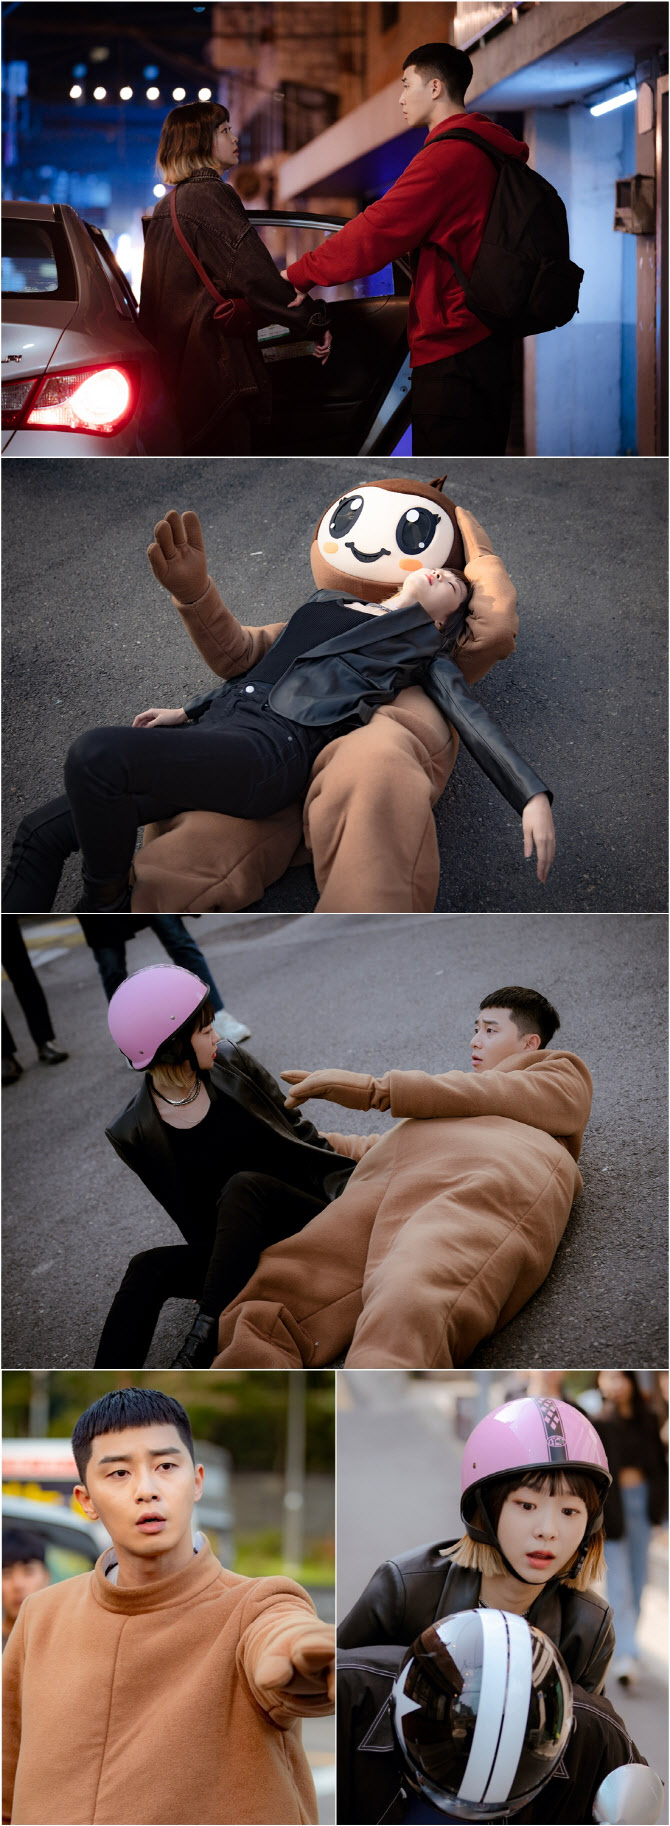 Park Seo-joon and Kim Da-mi meet at last.After waiting, One Clath, who met with viewers, fascinated viewers from the first broadcast, foreshadowing the hip rebellion of youths who have united with stubbornness and enthusiasm in an unreasonable world.Above all, Park Seo-joons presence, which had returned to the same group of hot-blooded youthful Park Seo-joon, was overwhelming.In the last broadcast, the death of his father led to a terrible link between Park and Jang Dae-hee (Yoo Jae-myung), the president of Jangga.Roy, who was released from prison with a boiling heart in the word revenge, revealed his dream of setting up a small store in Itae One.Seven years later, Roy, who entered Itae One to achieve his dream, reunited with Oh Su-ah (Kwon Na-ra), amplifying his expectations.Meanwhile, another person who will change the fate of Roy, Joy, a genius sociopath girl of IQ 162, is about to make a full-scale start.The photo shows the first meeting between Roy and Joy, and Joy, who is about to get into a taxi, and Roy, who snatched his wrist, foresaw an unusual first meeting.The emergence of Joy, who has stimulated the just Xiao Xinnam Park, has already attracted expectations.Another photo released together attracts attention from two people who have been reunited on the streets of Itae, and Joy, who is divided into two bodies as if he passed out over a person wearing a doll mask, attracts attention.The main character in the doll is Roy, Xiao Xin, and the extraordinary personality of the influencer Joy, who adds to the expectation of what synergy they will receive.Especially, Kim Da-mi, who made a topic by decorating the first scene of Drama, is focused on his performance.In the third episode, which will be broadcast on the 7th (Friday), Ones Sweet Night Foa, which is filled with the blood and sweat of Park, finally opens.Here, the meeting between Joy Seo and Jang Geun-soo (Kim Dong-hee), the second son of Jangga, is expected to bring a stir to the single night.The first meeting between Roy and Joy is exciting from the start, said the production team of One Klath.I think you can feel Joys unique charm at once, he said. Watch the beginning of Roys turbulent one-star, the beginning of a hot rebellion.Meanwhile, the third episode of One Clath will be broadcast on JTBC at 10:50 pm on the 7th (Friday).kim bo-young